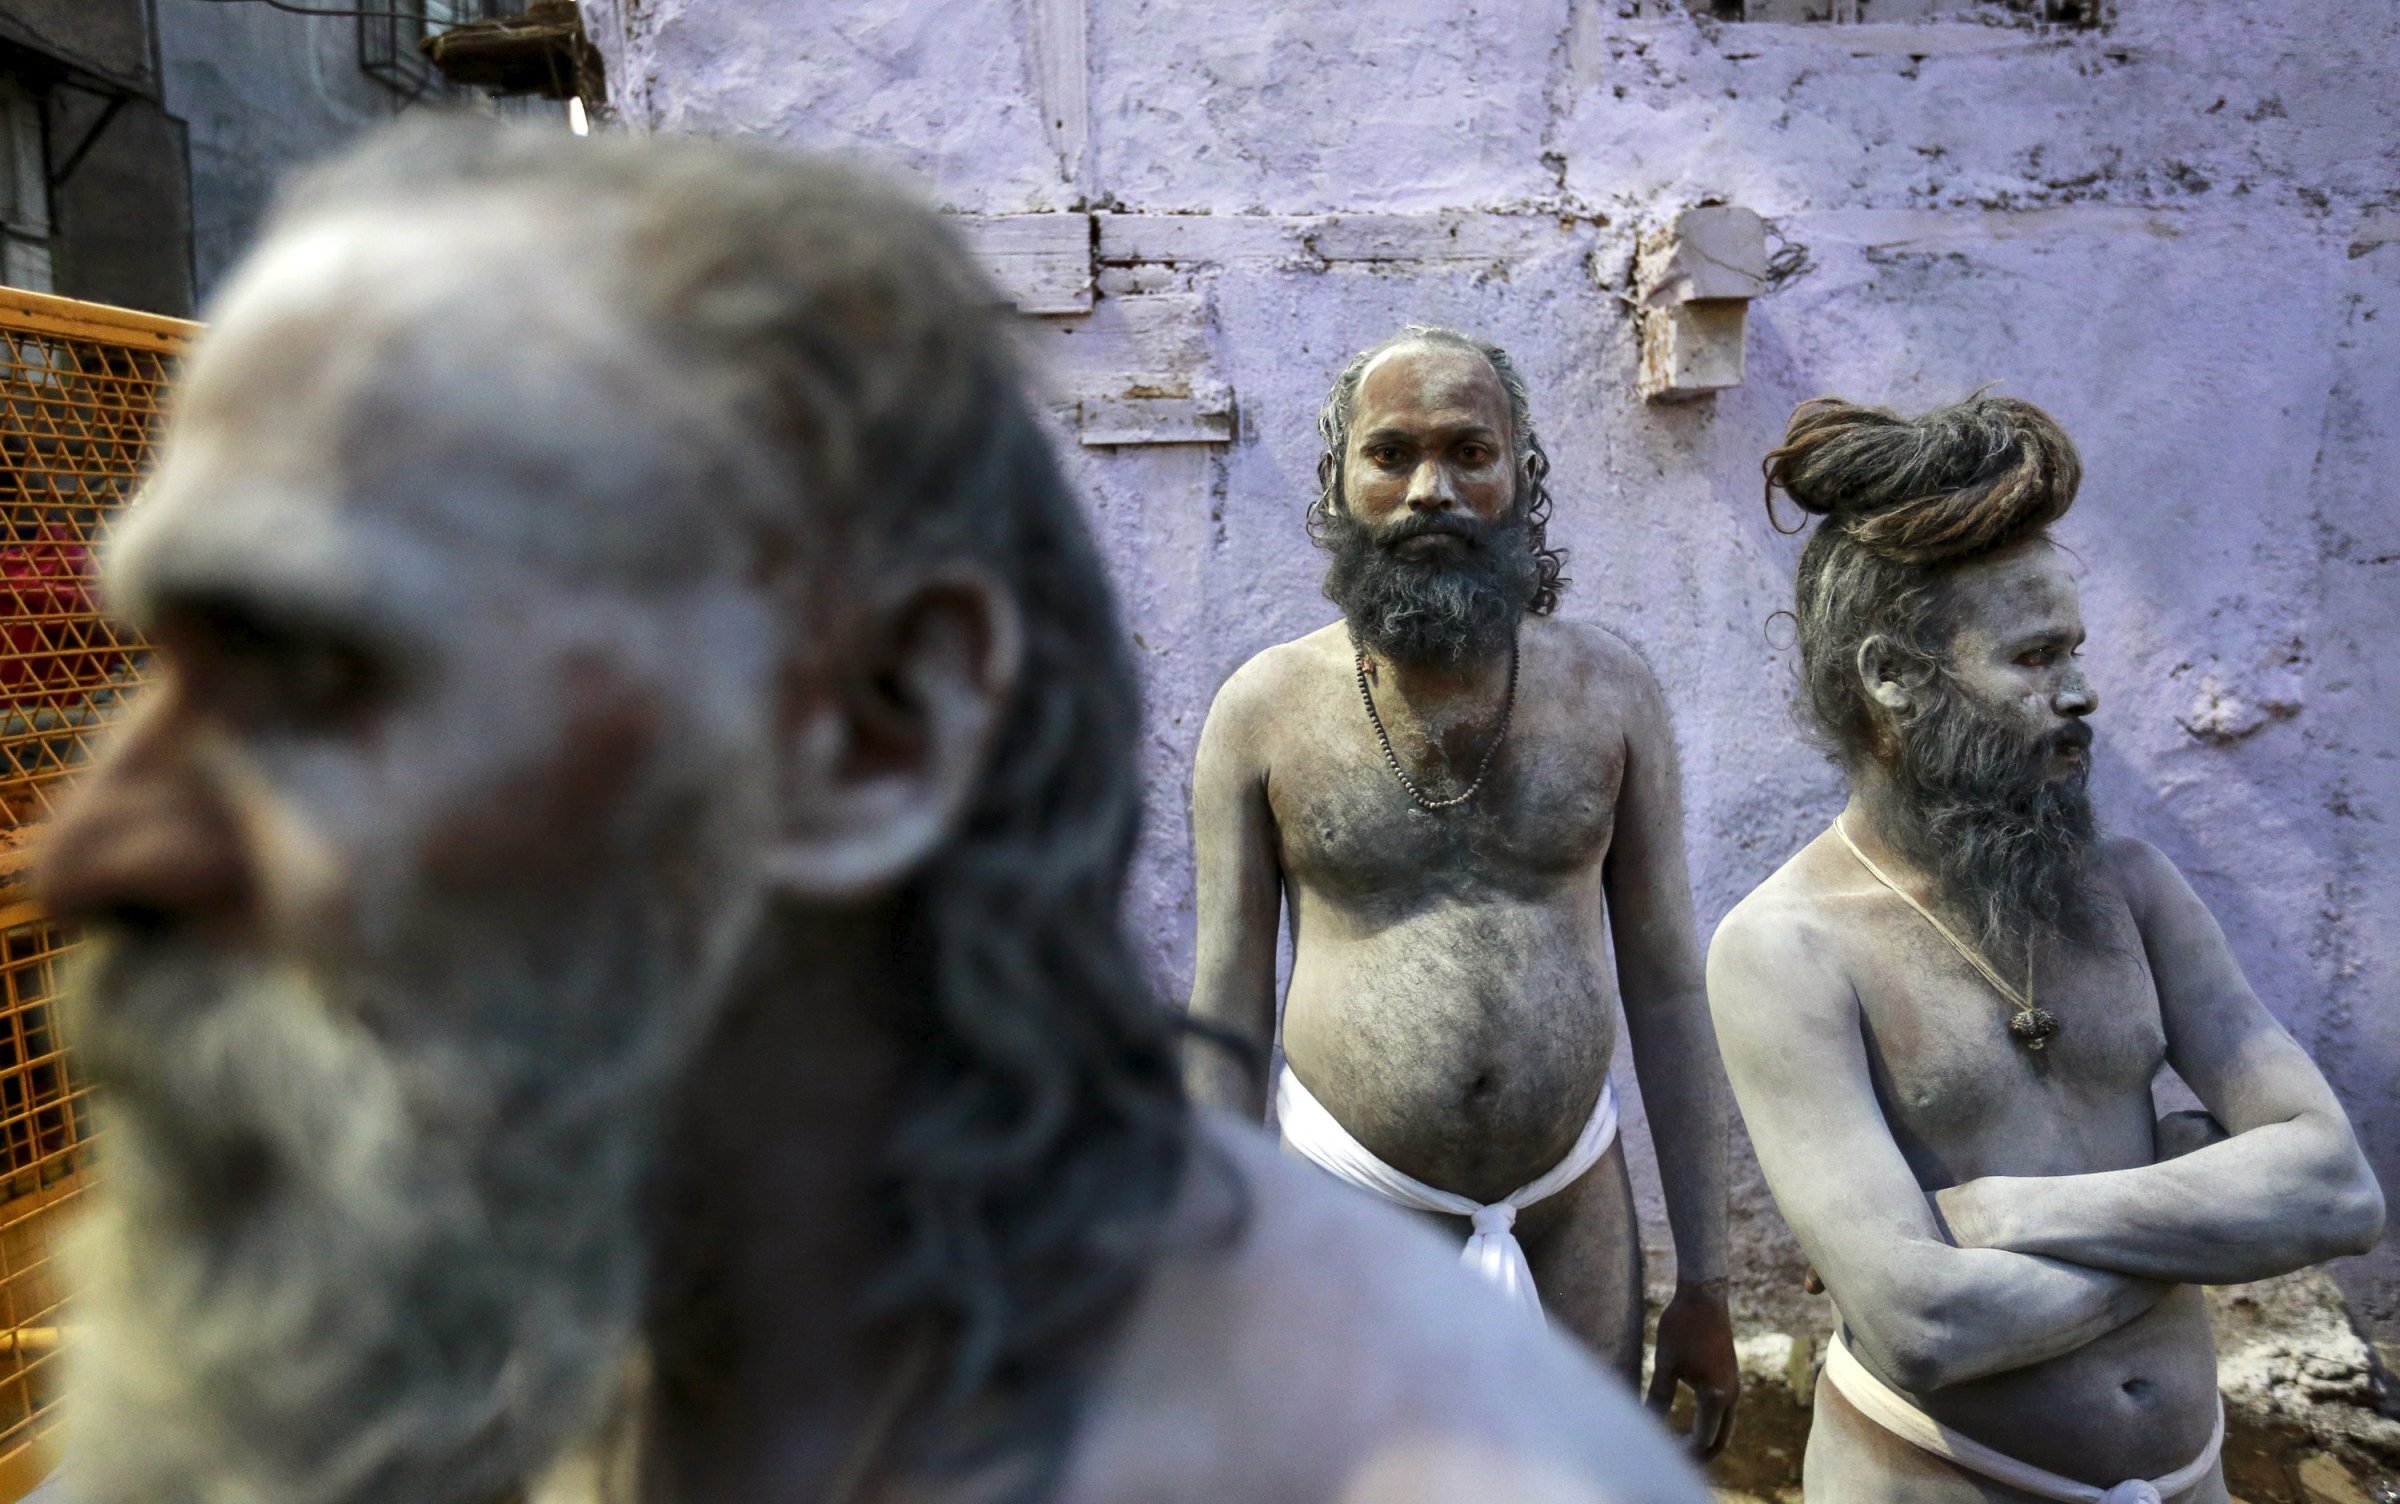 Naga Sadhus, or Hindu holy men, wait during a procession before taking a dip in a holy pond during the second "Shahi Snan" (grand bath) at "Kumbh Mela", or Pitcher Festival, in Trimbakeshwar